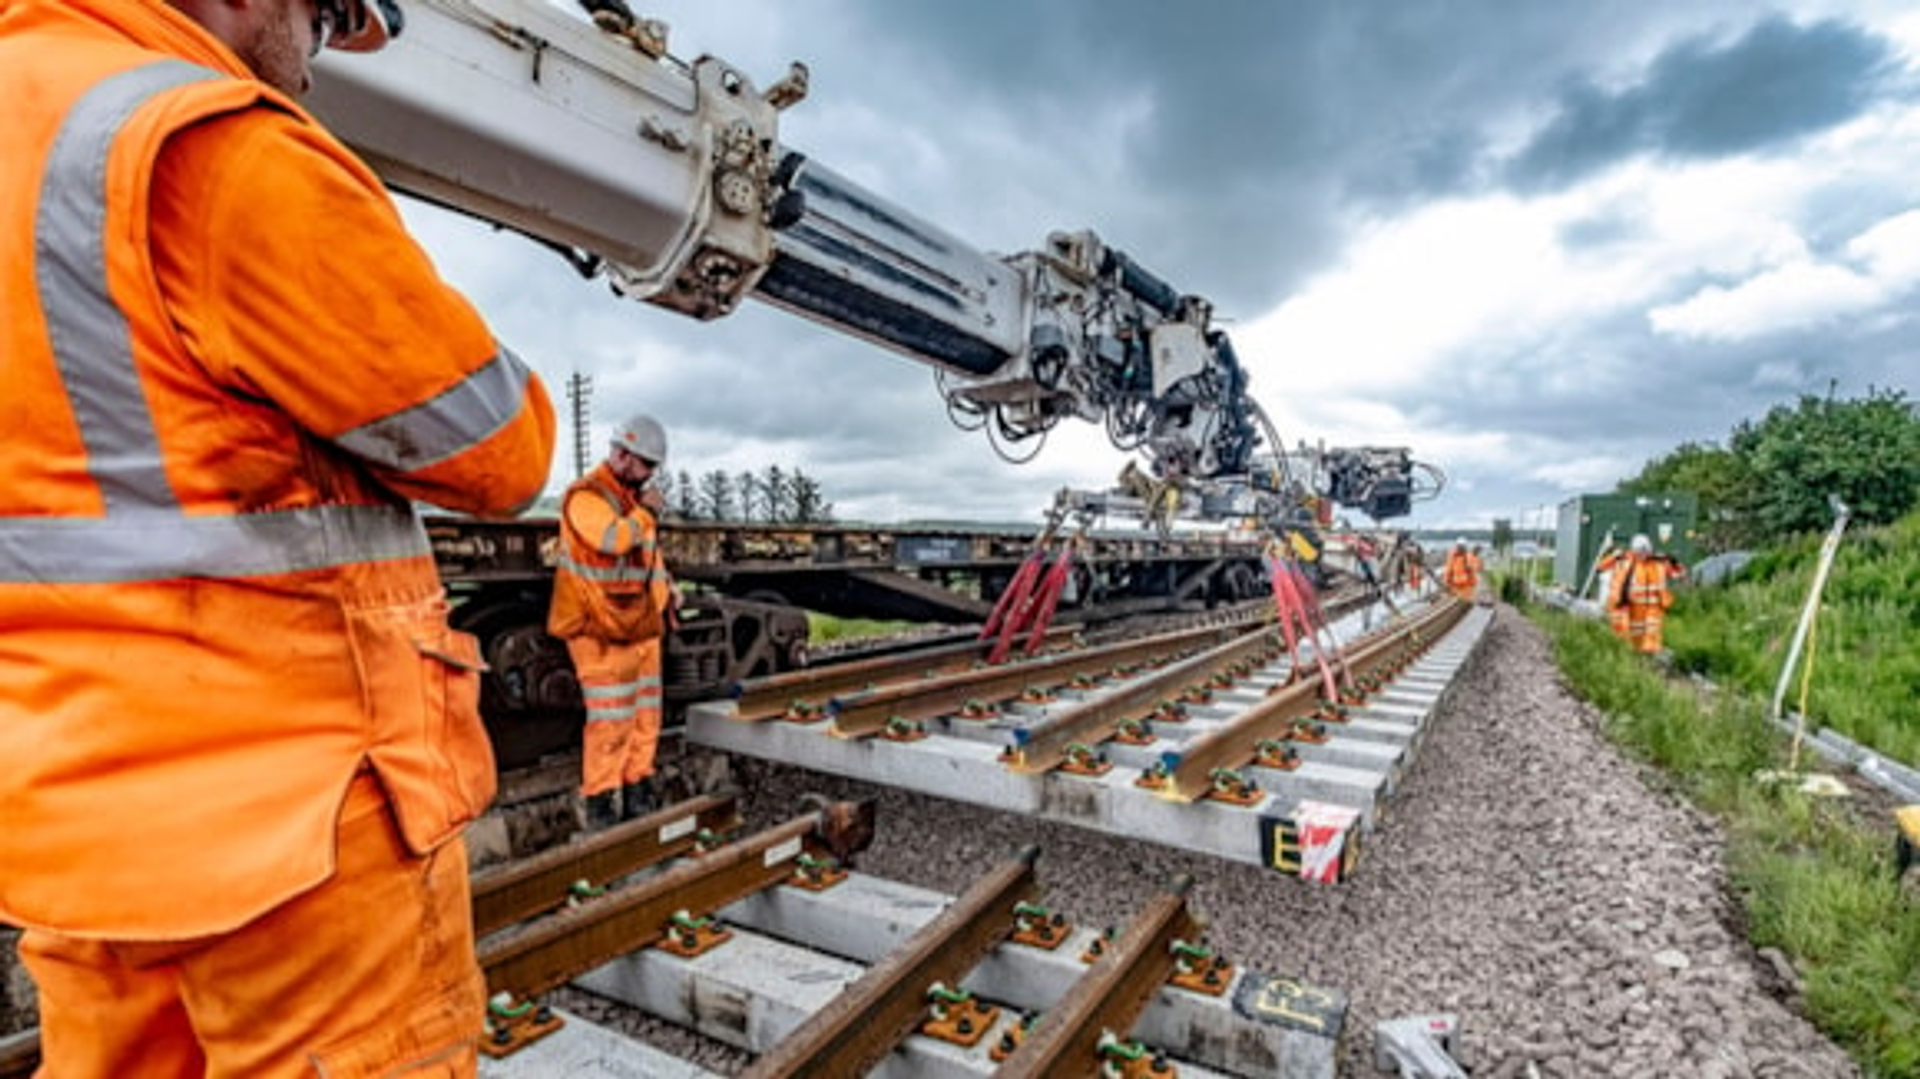 Engineering works to affect trains in the Worcester area next week